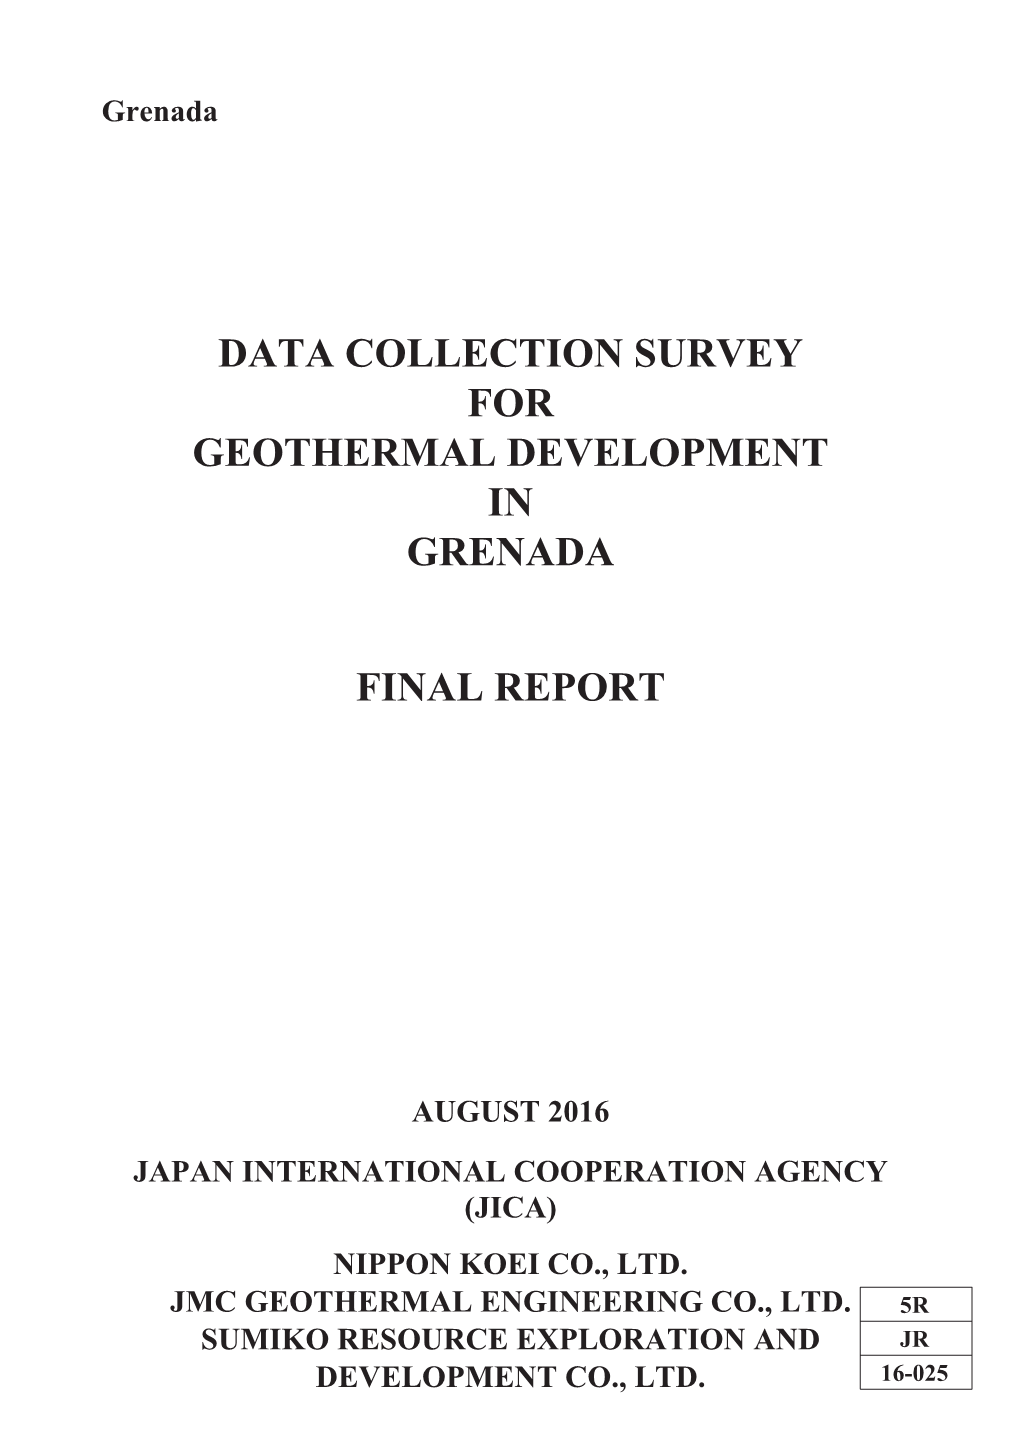 Data Collection Survey for Geothermal Development in Grenada